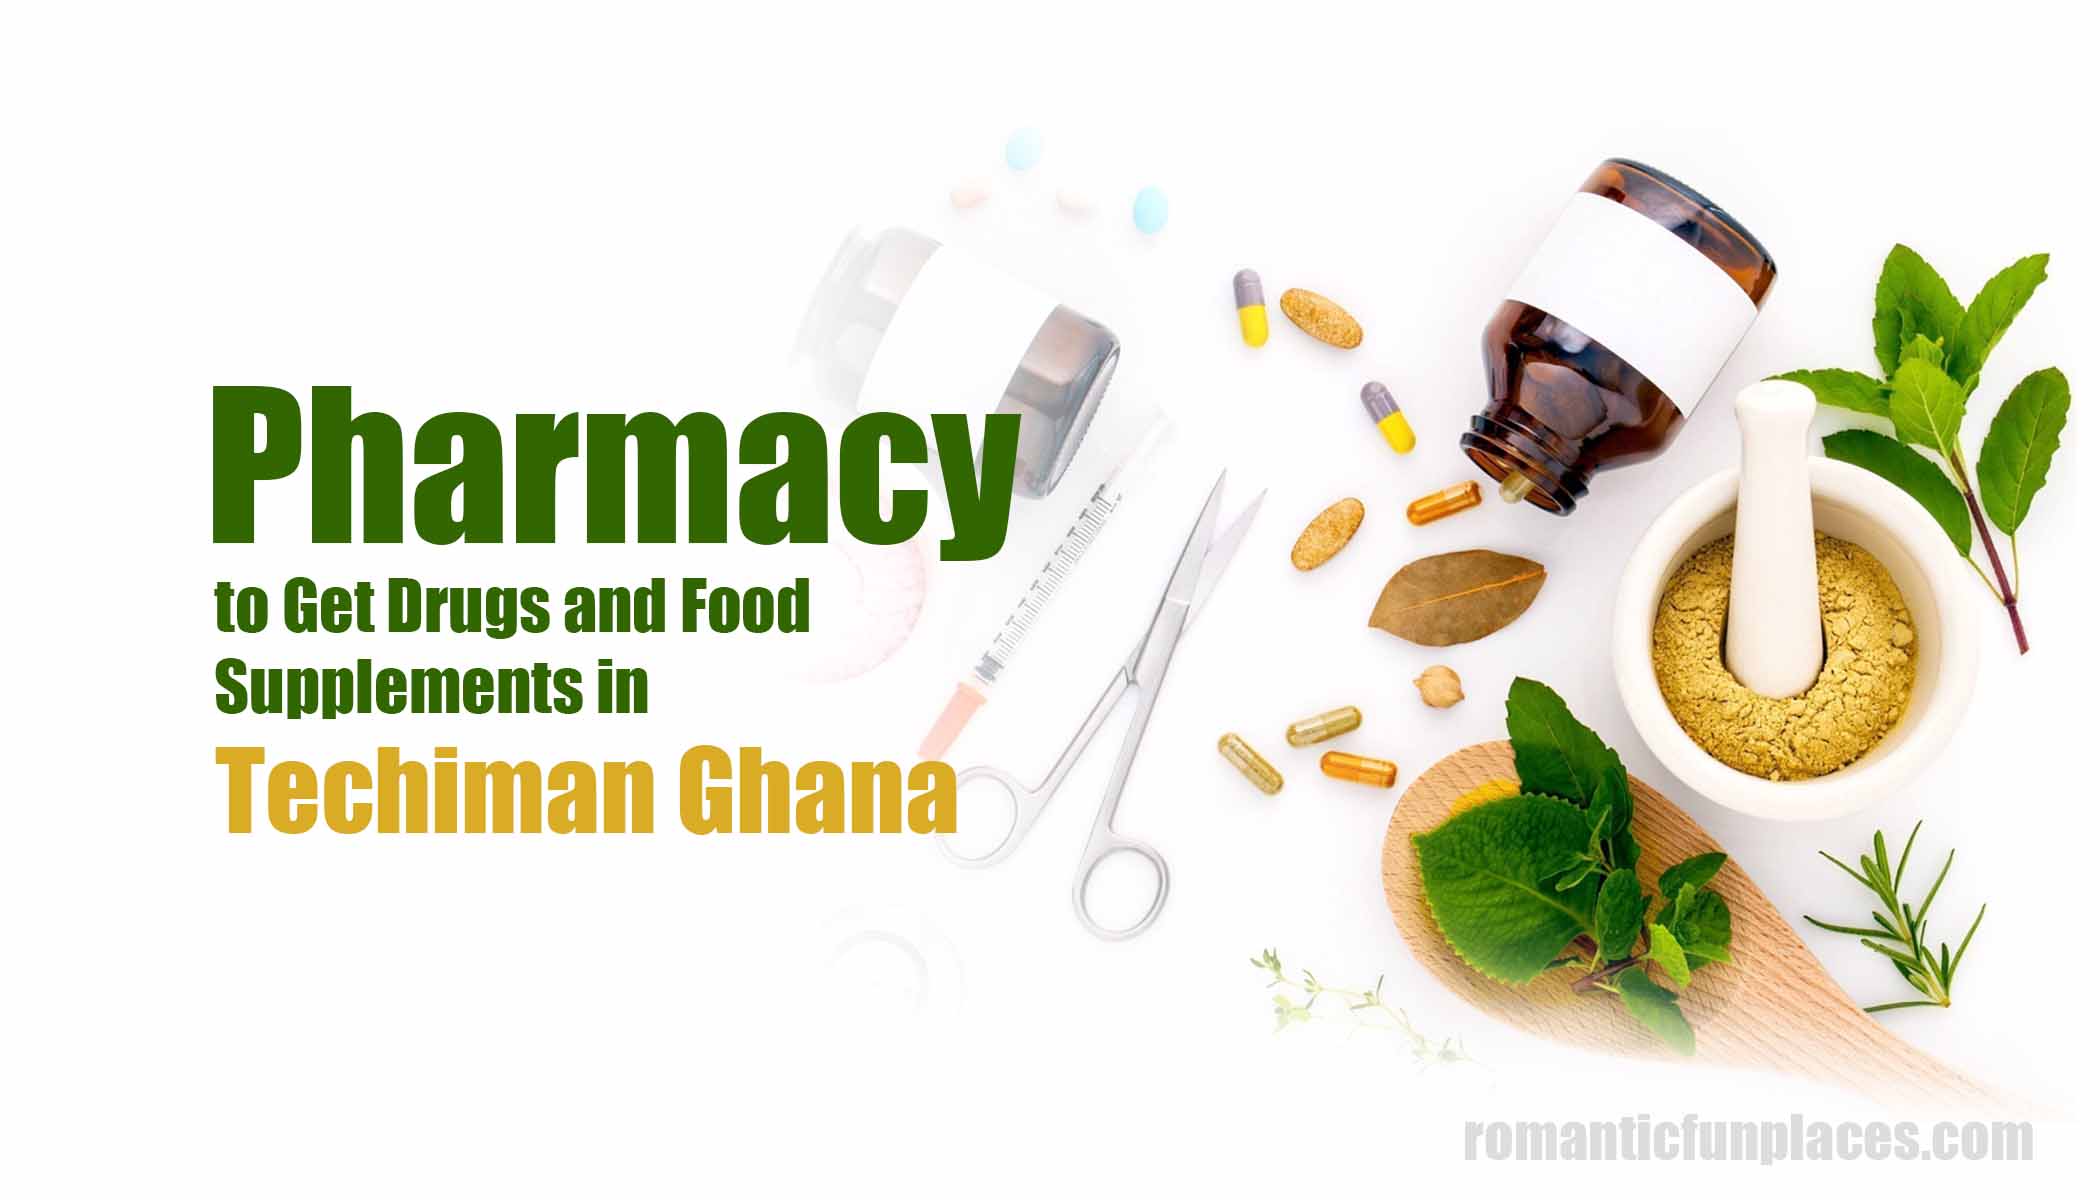 Pharmacy to Get Drugs and Food Supplements in Techiman Ghana